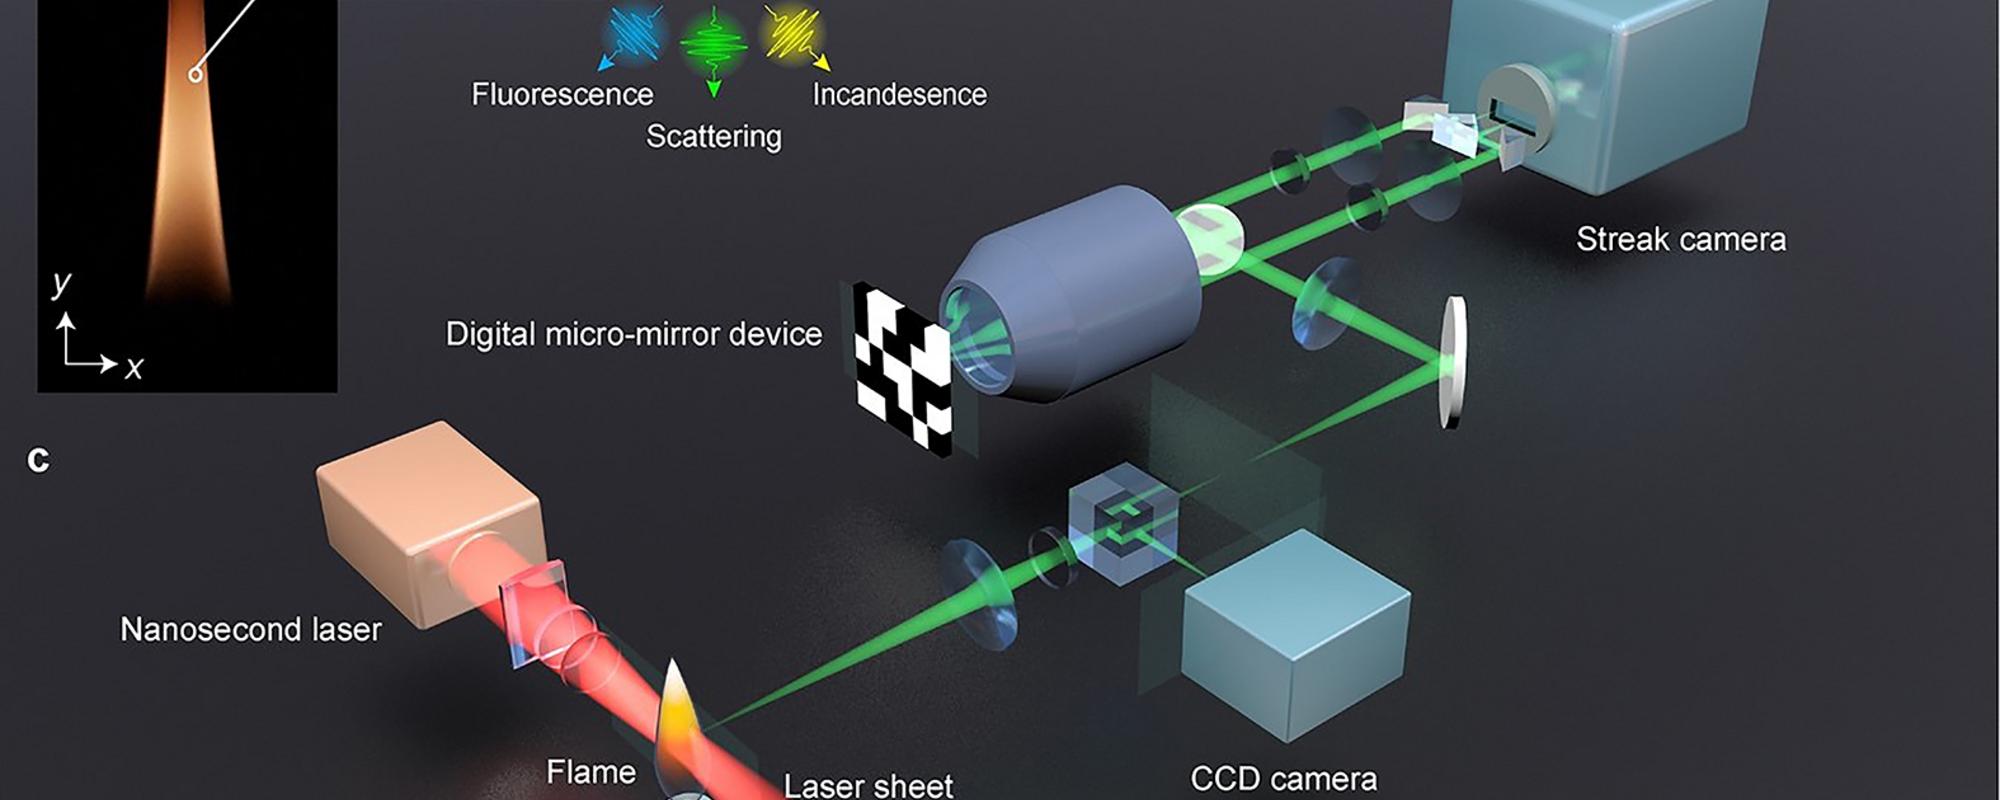 Illustration of the ultrafast LS-CUP laser camera that captures what happens during combustion